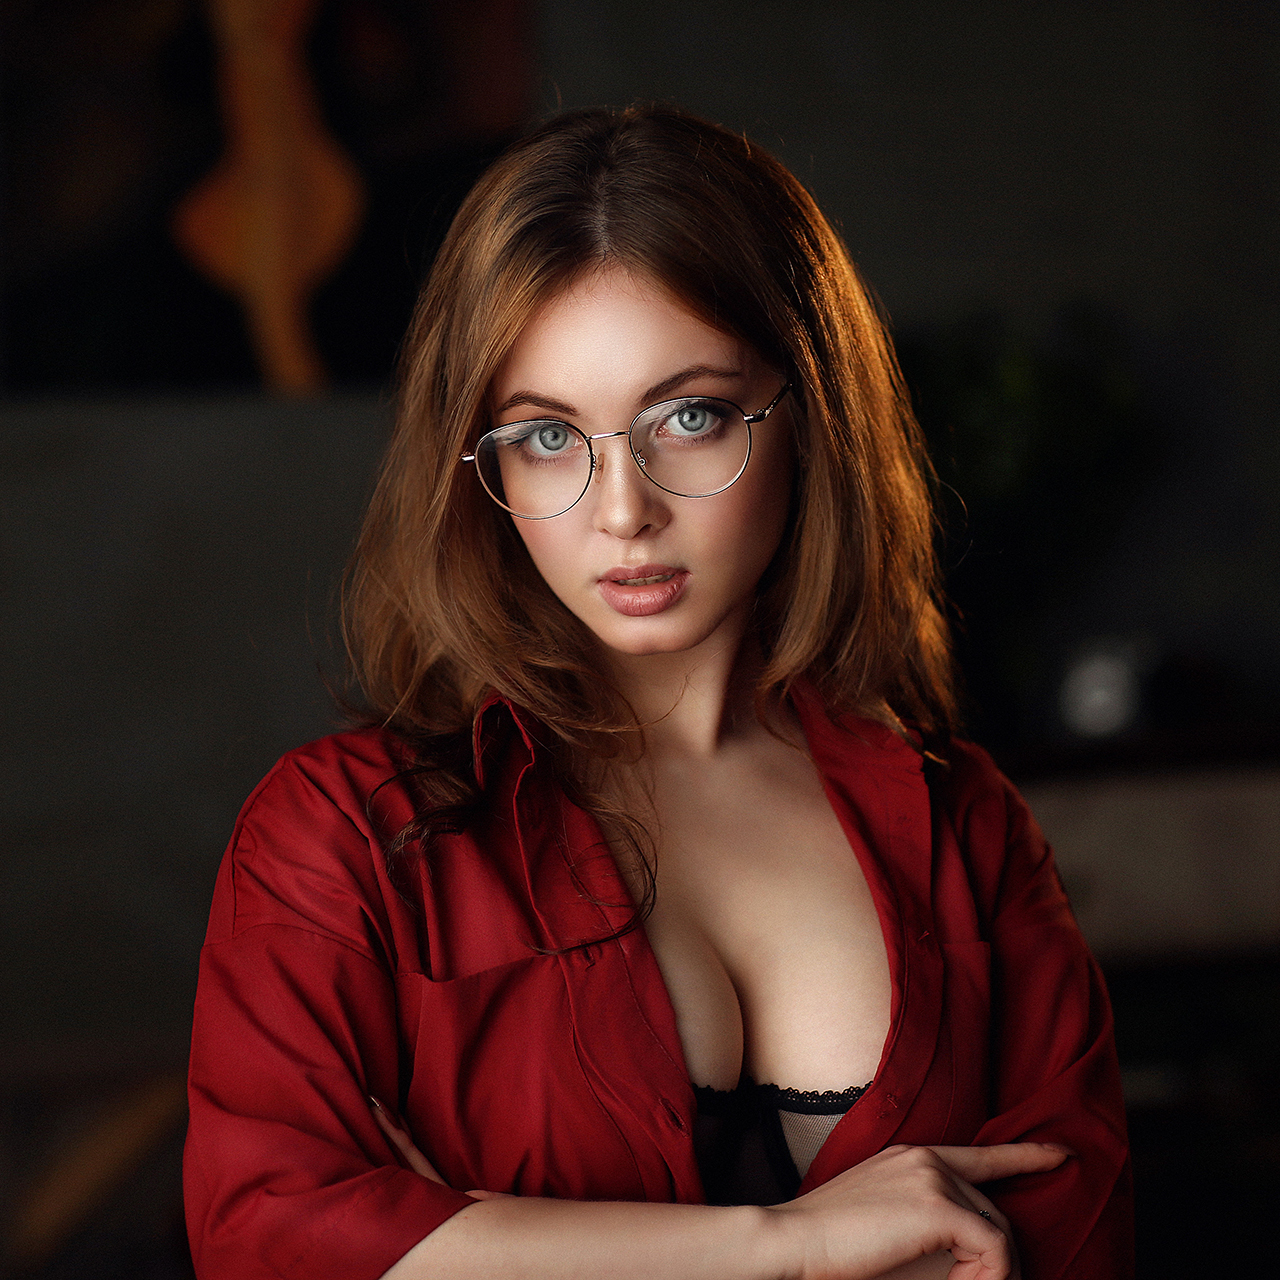 People 1280x1280 Dmitry Arhar women brunette long hair blue eyes glasses looking at viewer makeup shirt red clothing open clothes lingerie lace bra women with glasses Elena Alenskaya portrait display